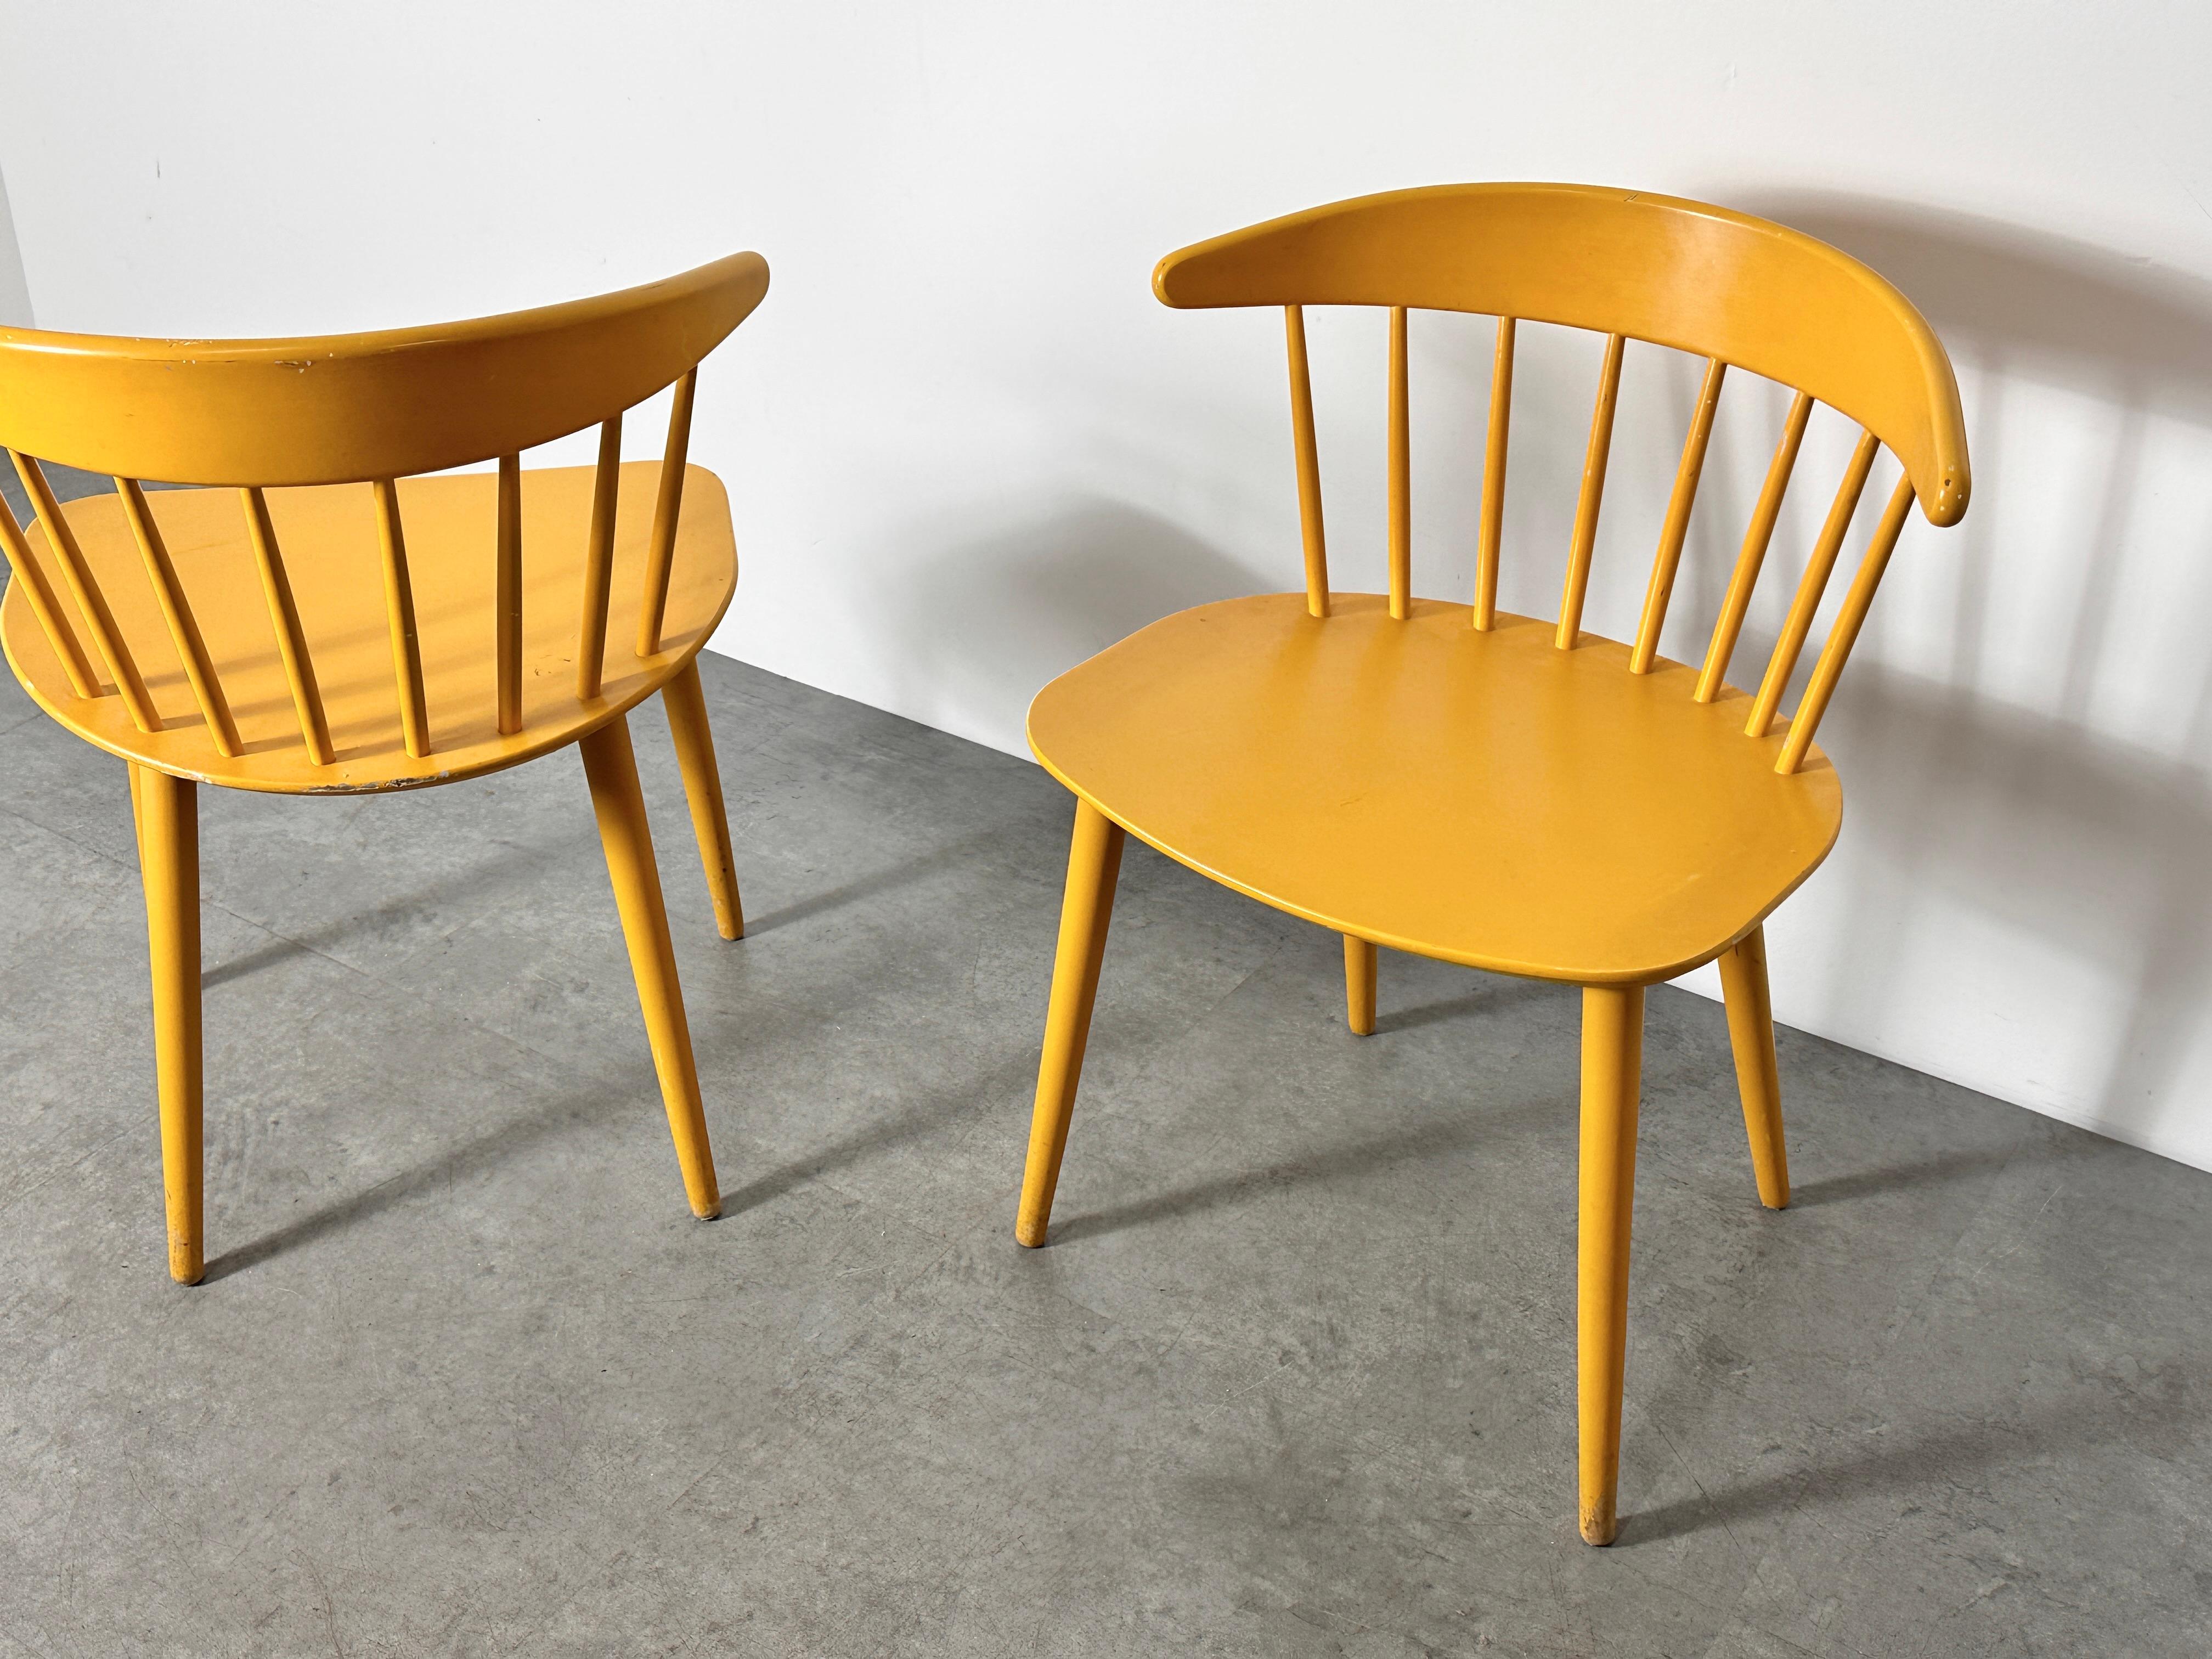 Jorgen Baekmark Pair Yellow Spindle Back Chairs Denmark 1960s  In Good Condition For Sale In Troy, MI